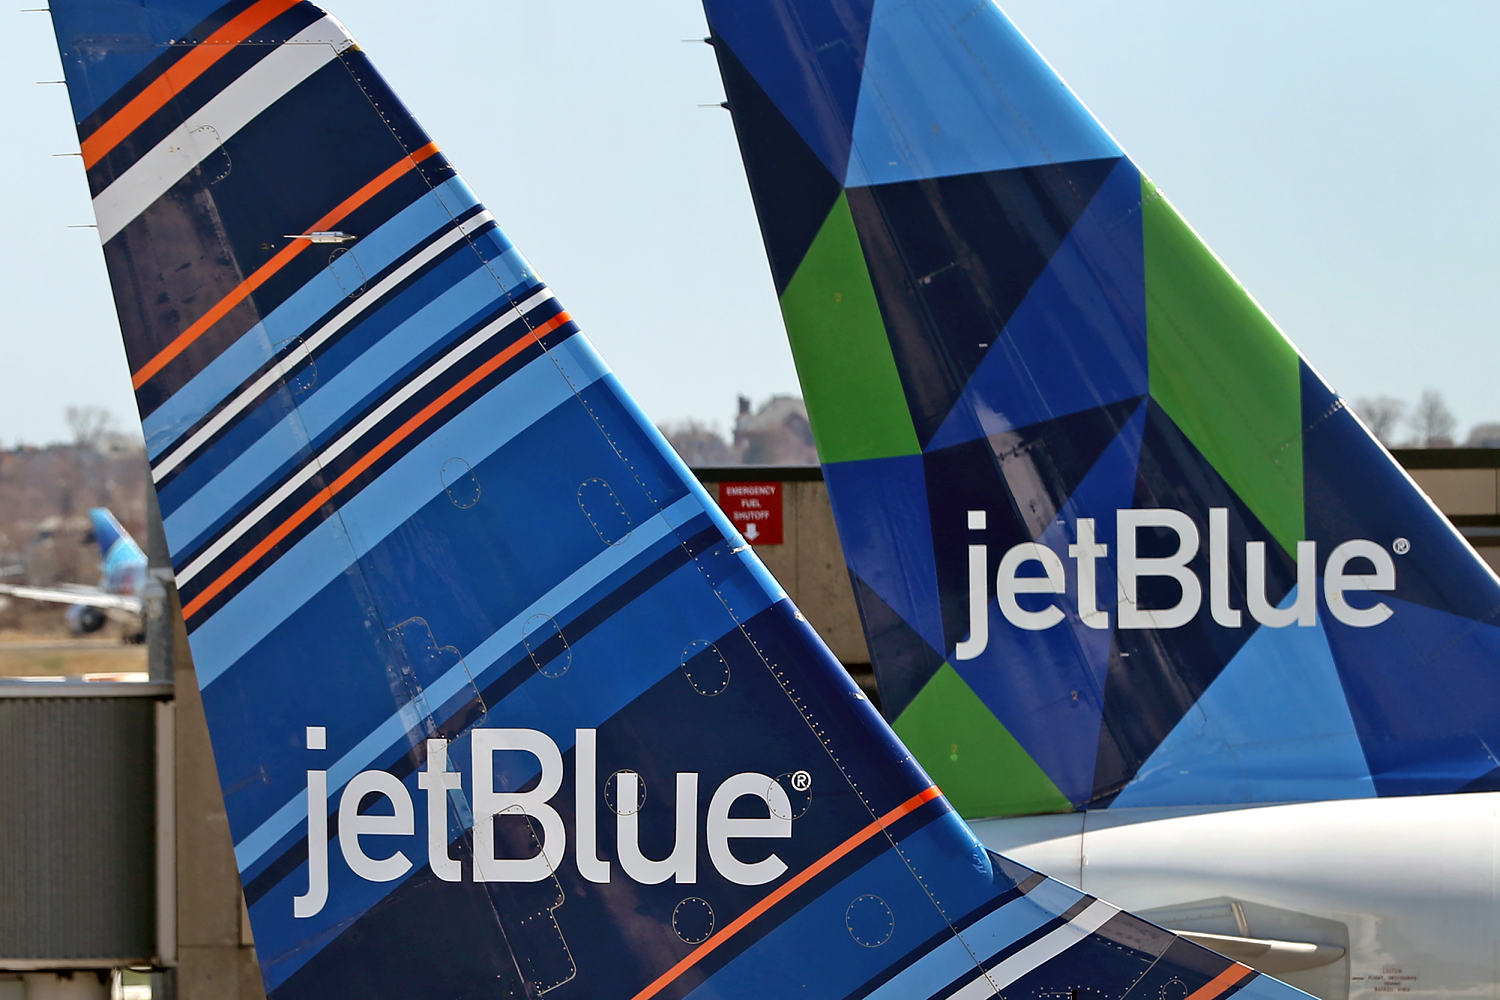 2 JetBlue planes touch at Logan Airport, leading to cancellation of both flights, authorities say